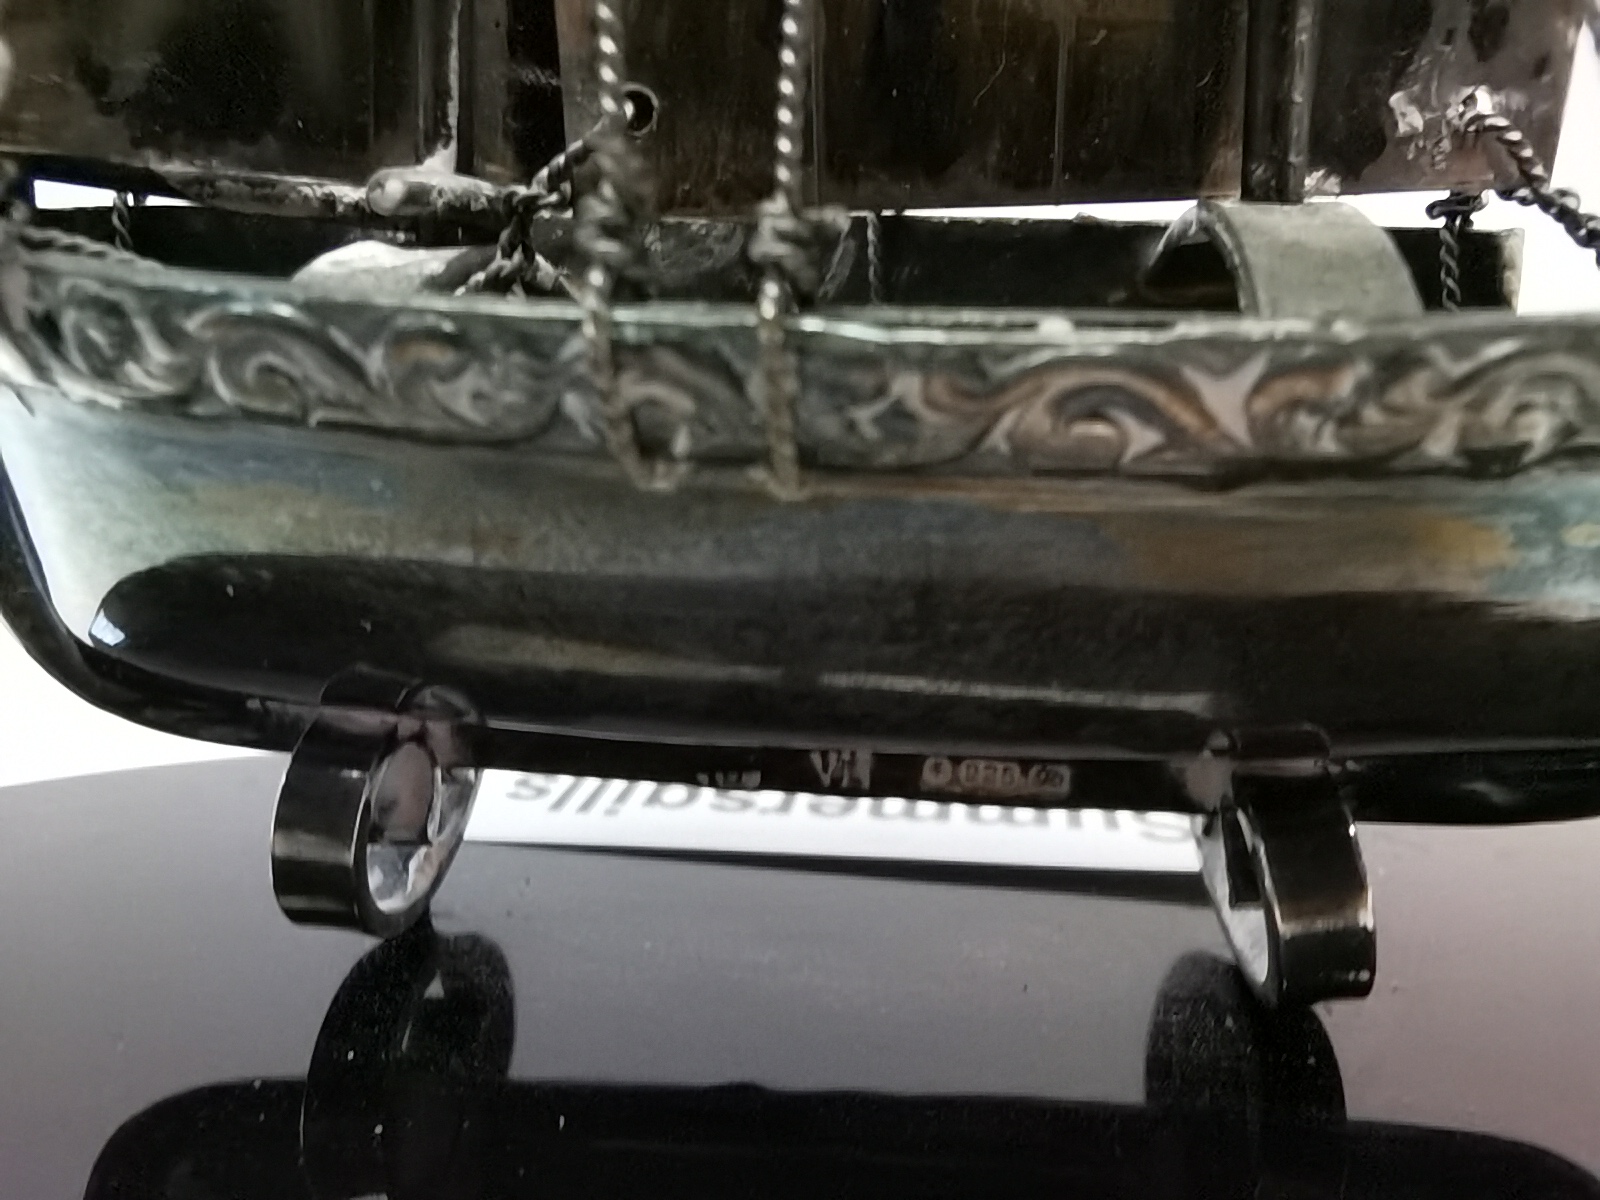 Silver boat - Image 2 of 3